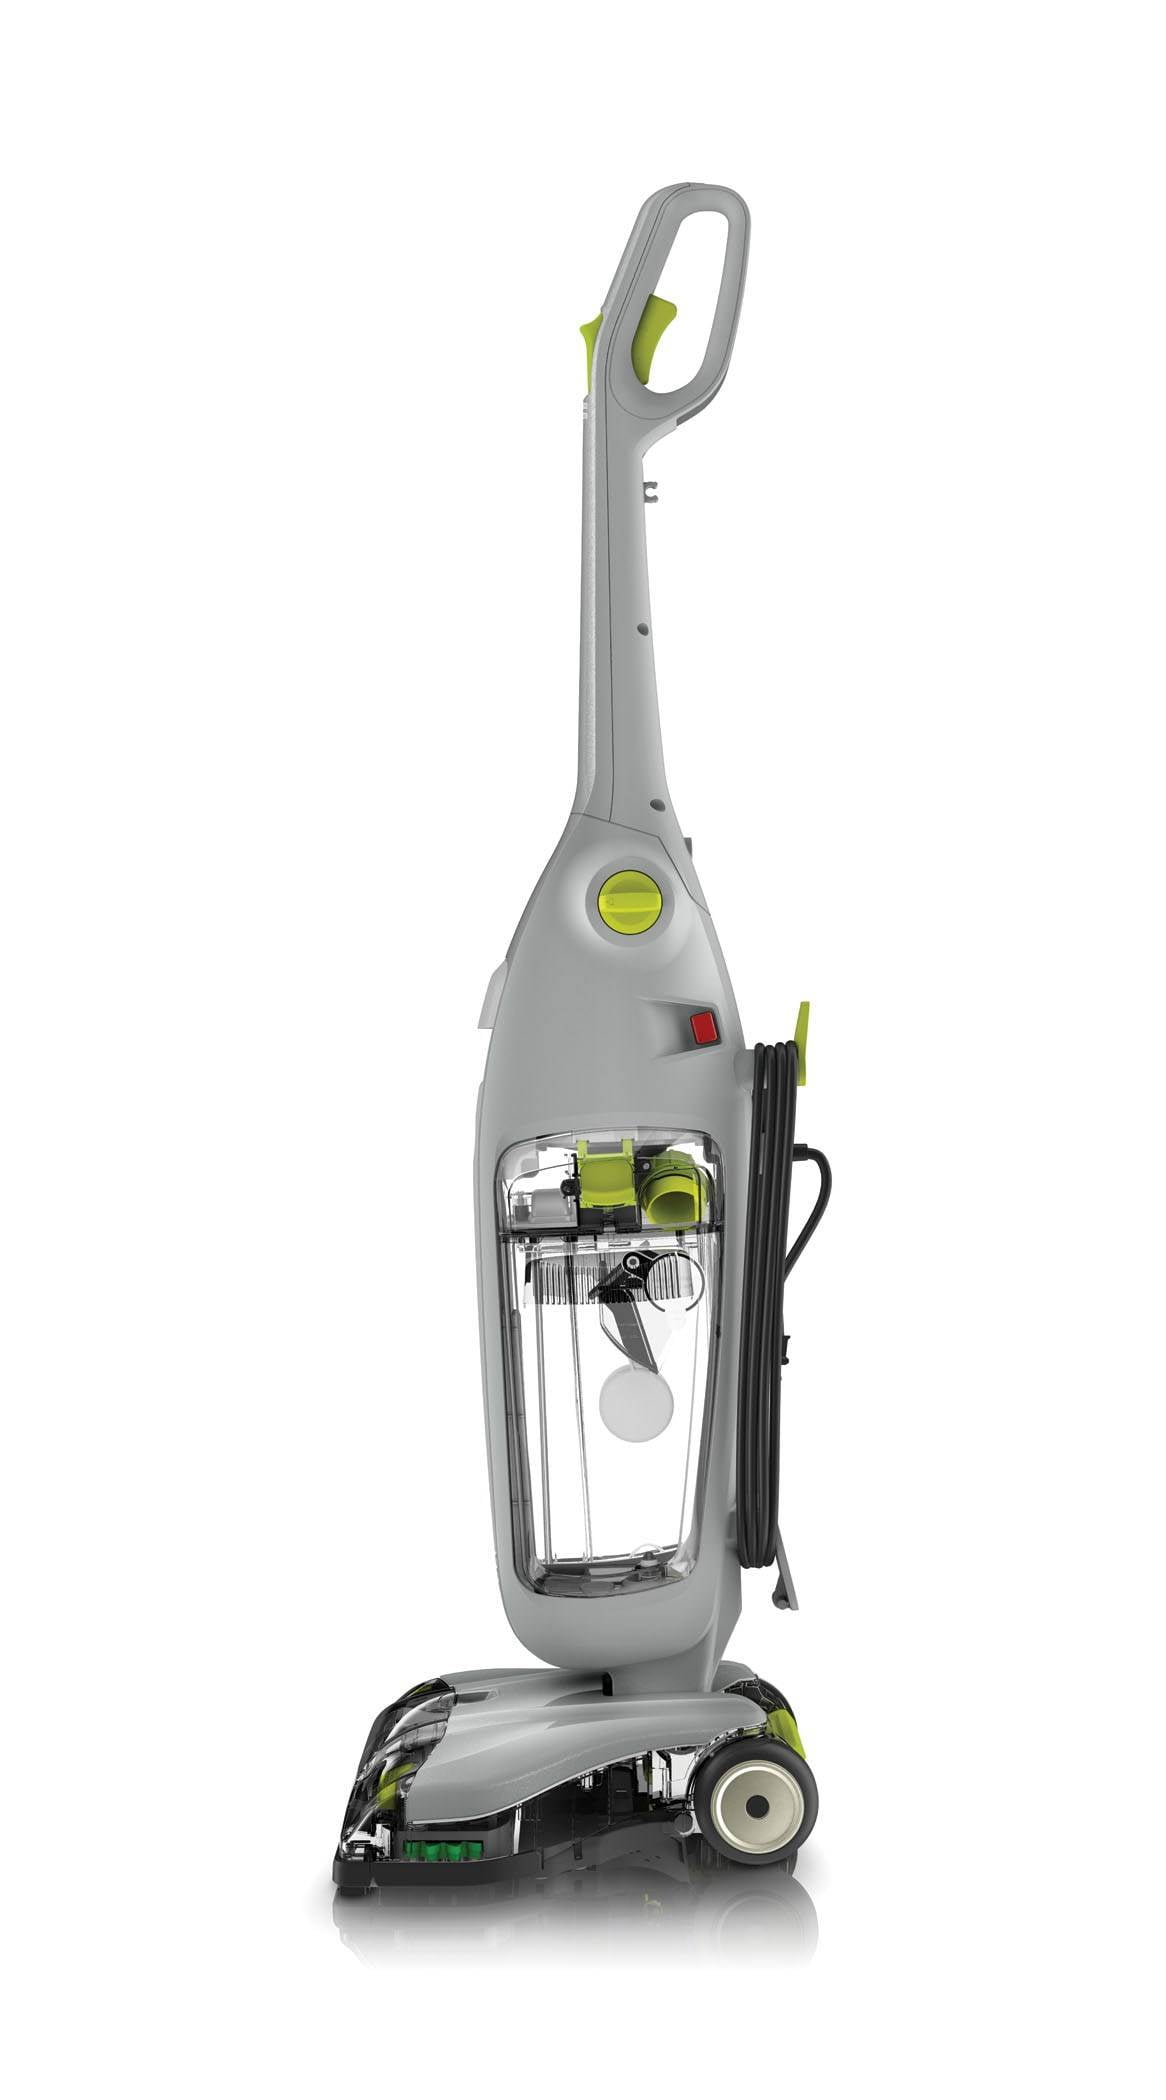 Hoover FloorMate Deluxe Hard Floor Cleaner Machine, FH40160PC and Hoover  Renewal Tile and Grout Floor Cleaner AH30433